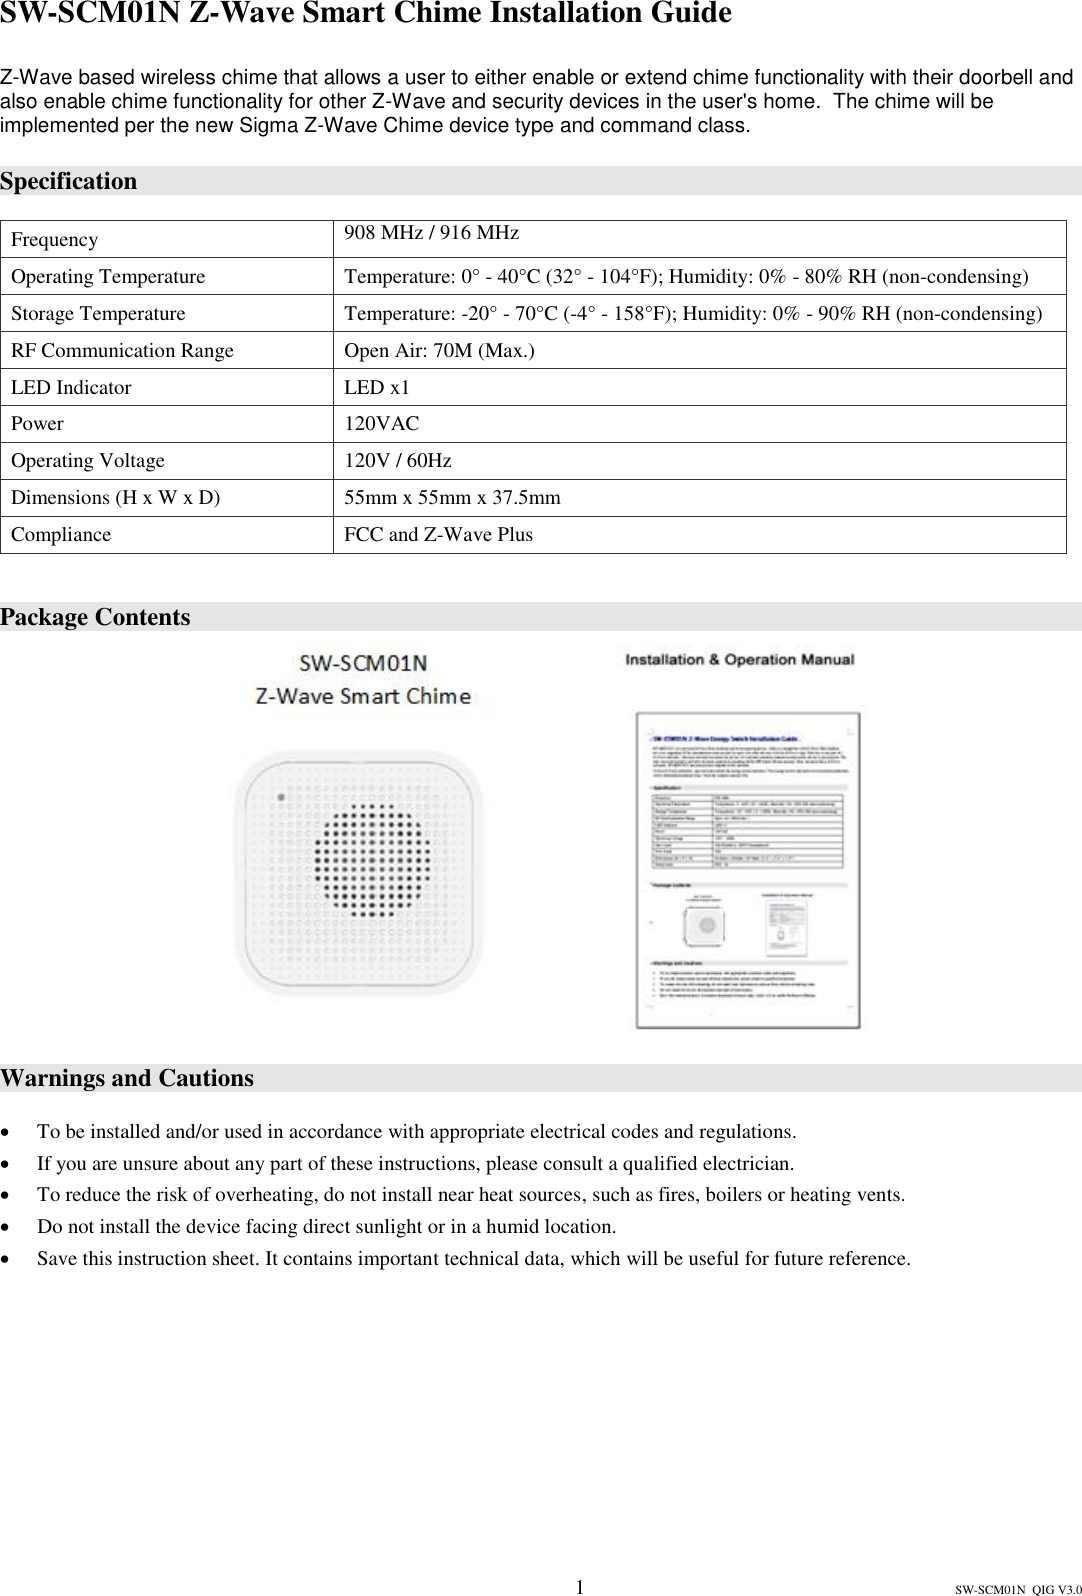 1                                                                       SW-SCM01N  QIG V3.0 SW-SCM01N Z-Wave Smart Chime Installation Guide Z-Wave based wireless chime that allows a user to either enable or extend chime functionality with their doorbell and also enable chime functionality for other Z-Wave and security devices in the user&apos;s home.  The chime will be implemented per the new Sigma Z-Wave Chime device type and command class. Specification Frequency 908 MHz / 916 MHz Operating Temperature Temperature: 0° - 40°C (32° - 104°F); Humidity: 0% - 80% RH (non-condensing)  Storage Temperature Temperature: -20° - 70°C (-4° - 158°F); Humidity: 0% - 90% RH (non-condensing)  RF Communication Range  Open Air: 70M (Max.)  LED Indicator  LED x1  Power  120VAC  Operating Voltage  120V / 60Hz  Dimensions (H x W x D)  55mm x 55mm x 37.5mm  Compliance  FCC and Z-Wave Plus  Package Contents                   Warnings and Cautions • To be installed and/or used in accordance with appropriate electrical codes and regulations.   • If you are unsure about any part of these instructions, please consult a qualified electrician.    • To reduce the risk of overheating, do not install near heat sources, such as fires, boilers or heating vents. • Do not install the device facing direct sunlight or in a humid location.  • Save this instruction sheet. It contains important technical data, which will be useful for future reference.       